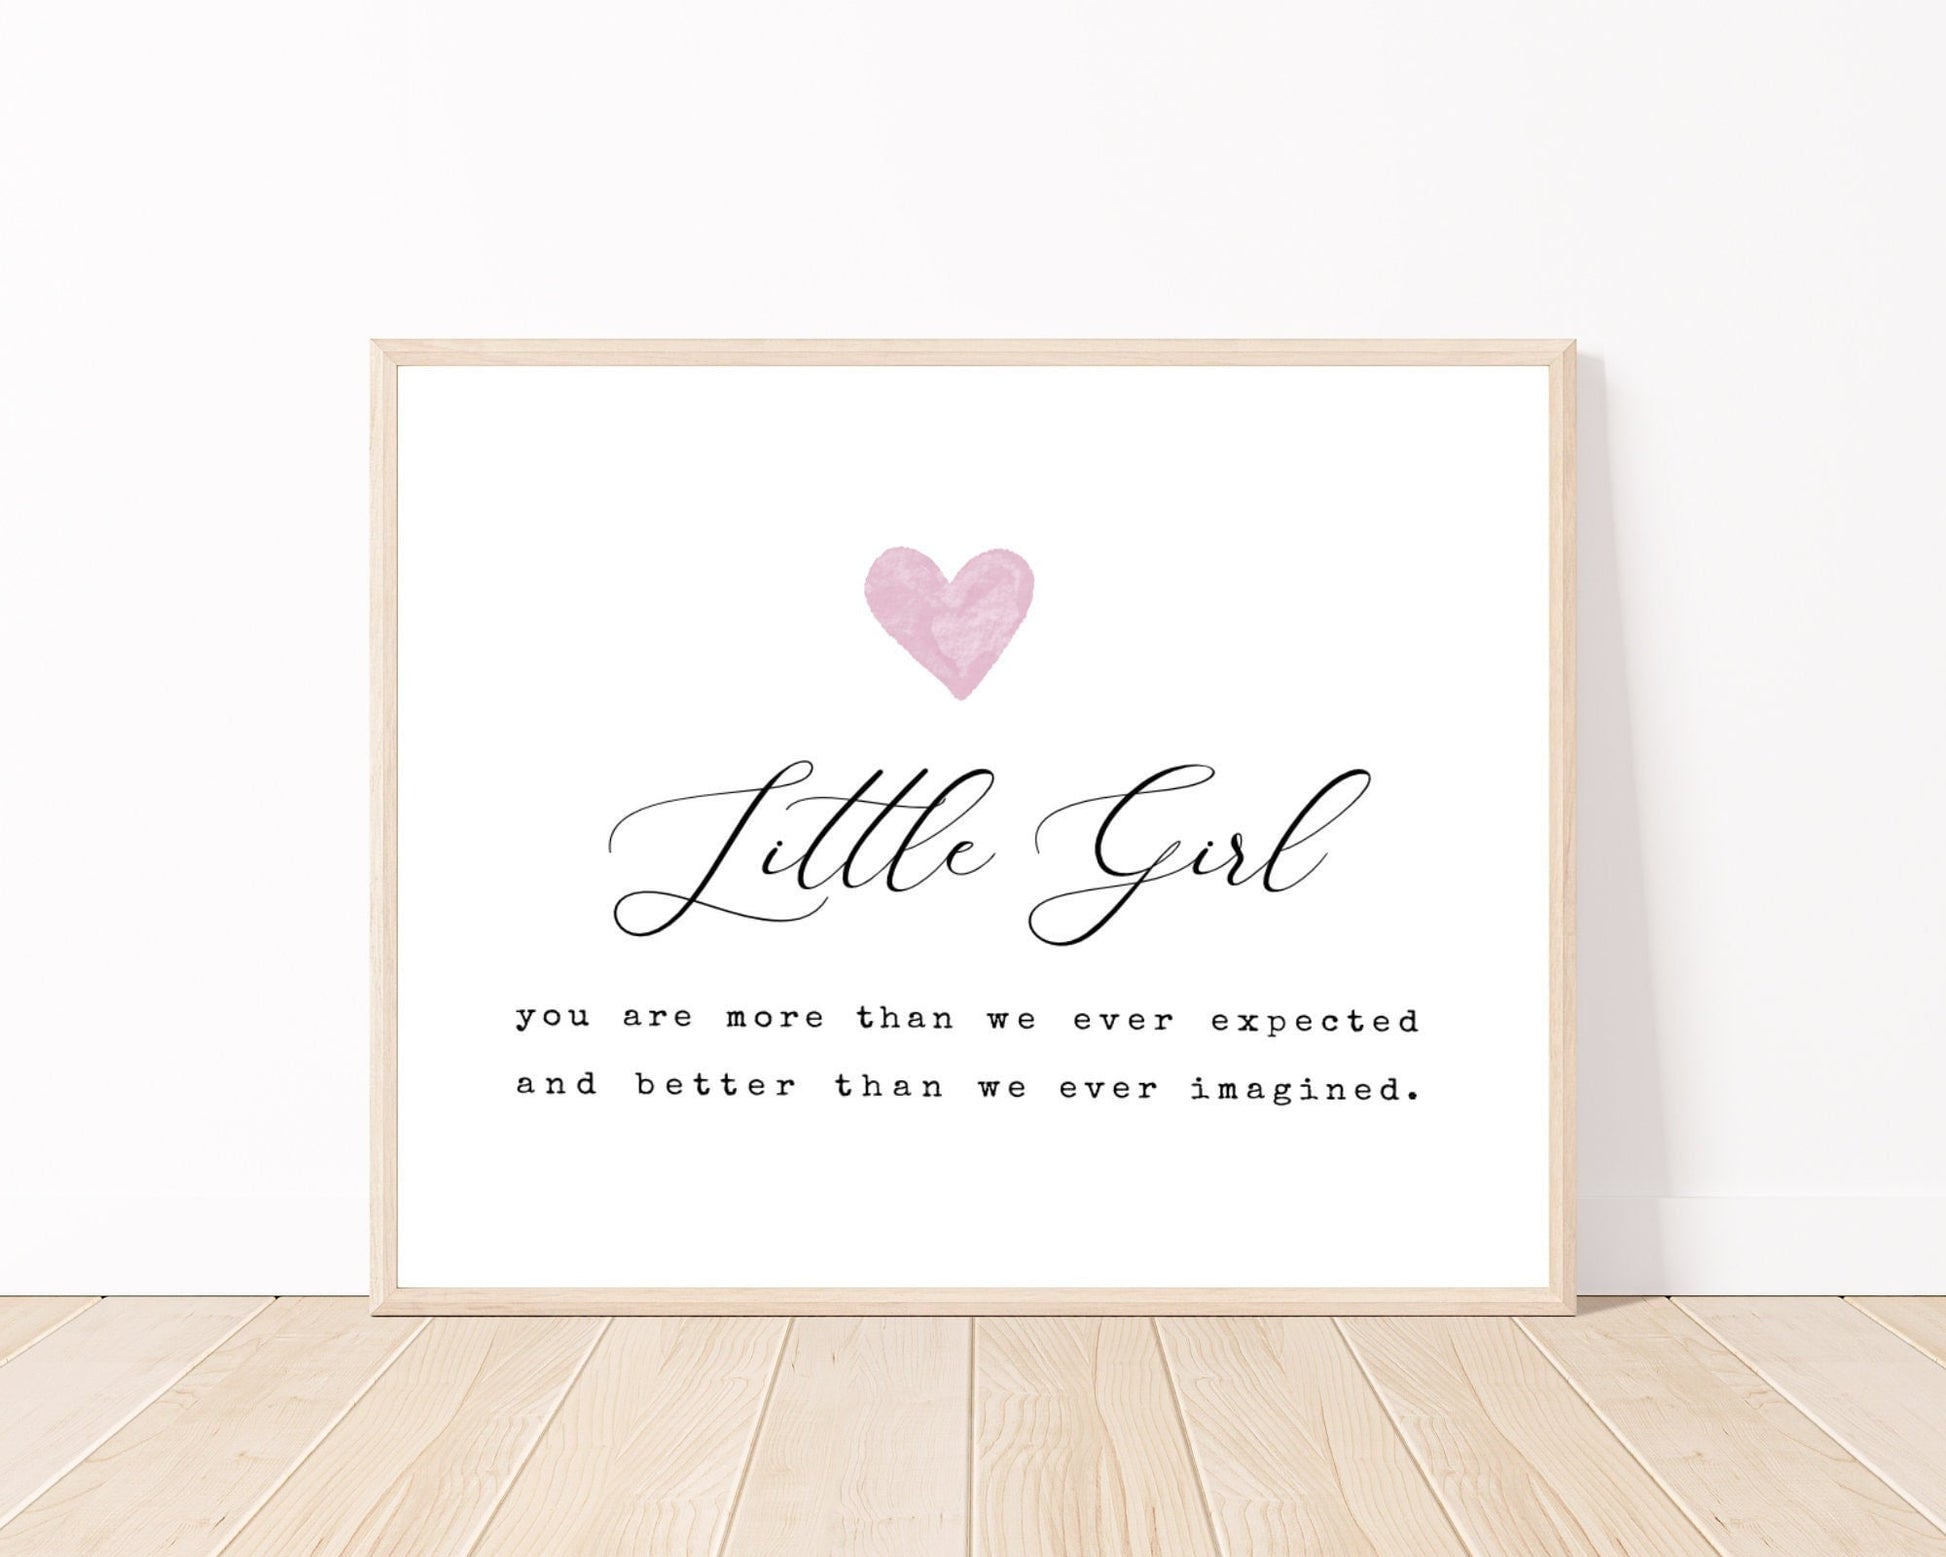 A little girl’s room horizontal digital print placed on a white wall and parquet flooring that has a pink heart at the top, and a piece of writing that says: “Little girl, you are more than we ever expected and better than we ever imagined.”